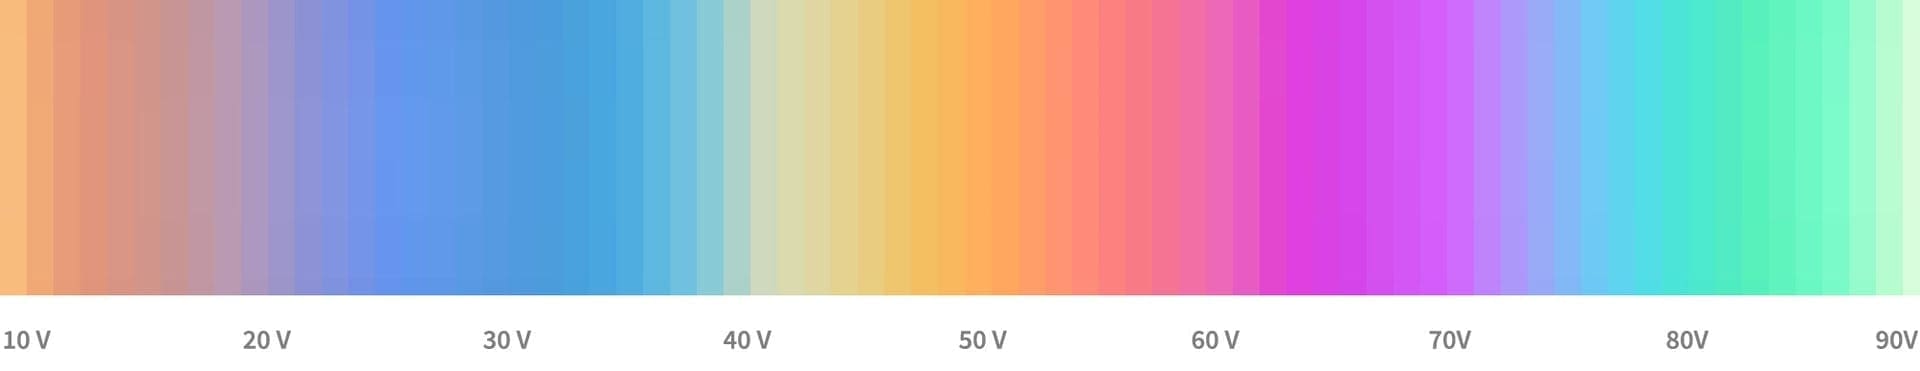 Color spectrum of available finishes on color-titanium. As voltage is increased, thickness of oxide layer also increases